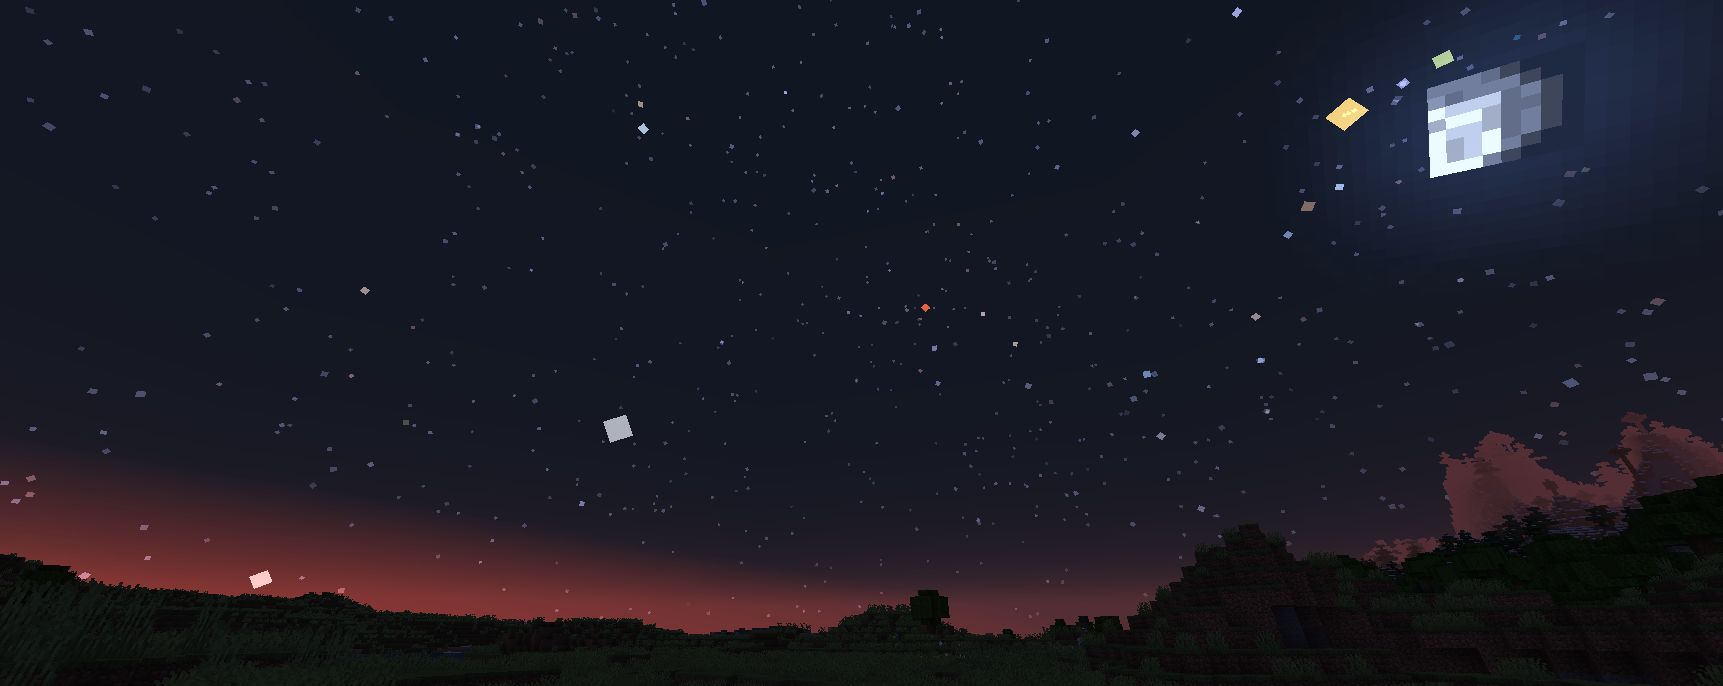 Five planets and the moon all visible at dawn. From left to right, 
Mercury (white), Venus (white), Mars (red), Jupiter (yellow) and Saturn (green).